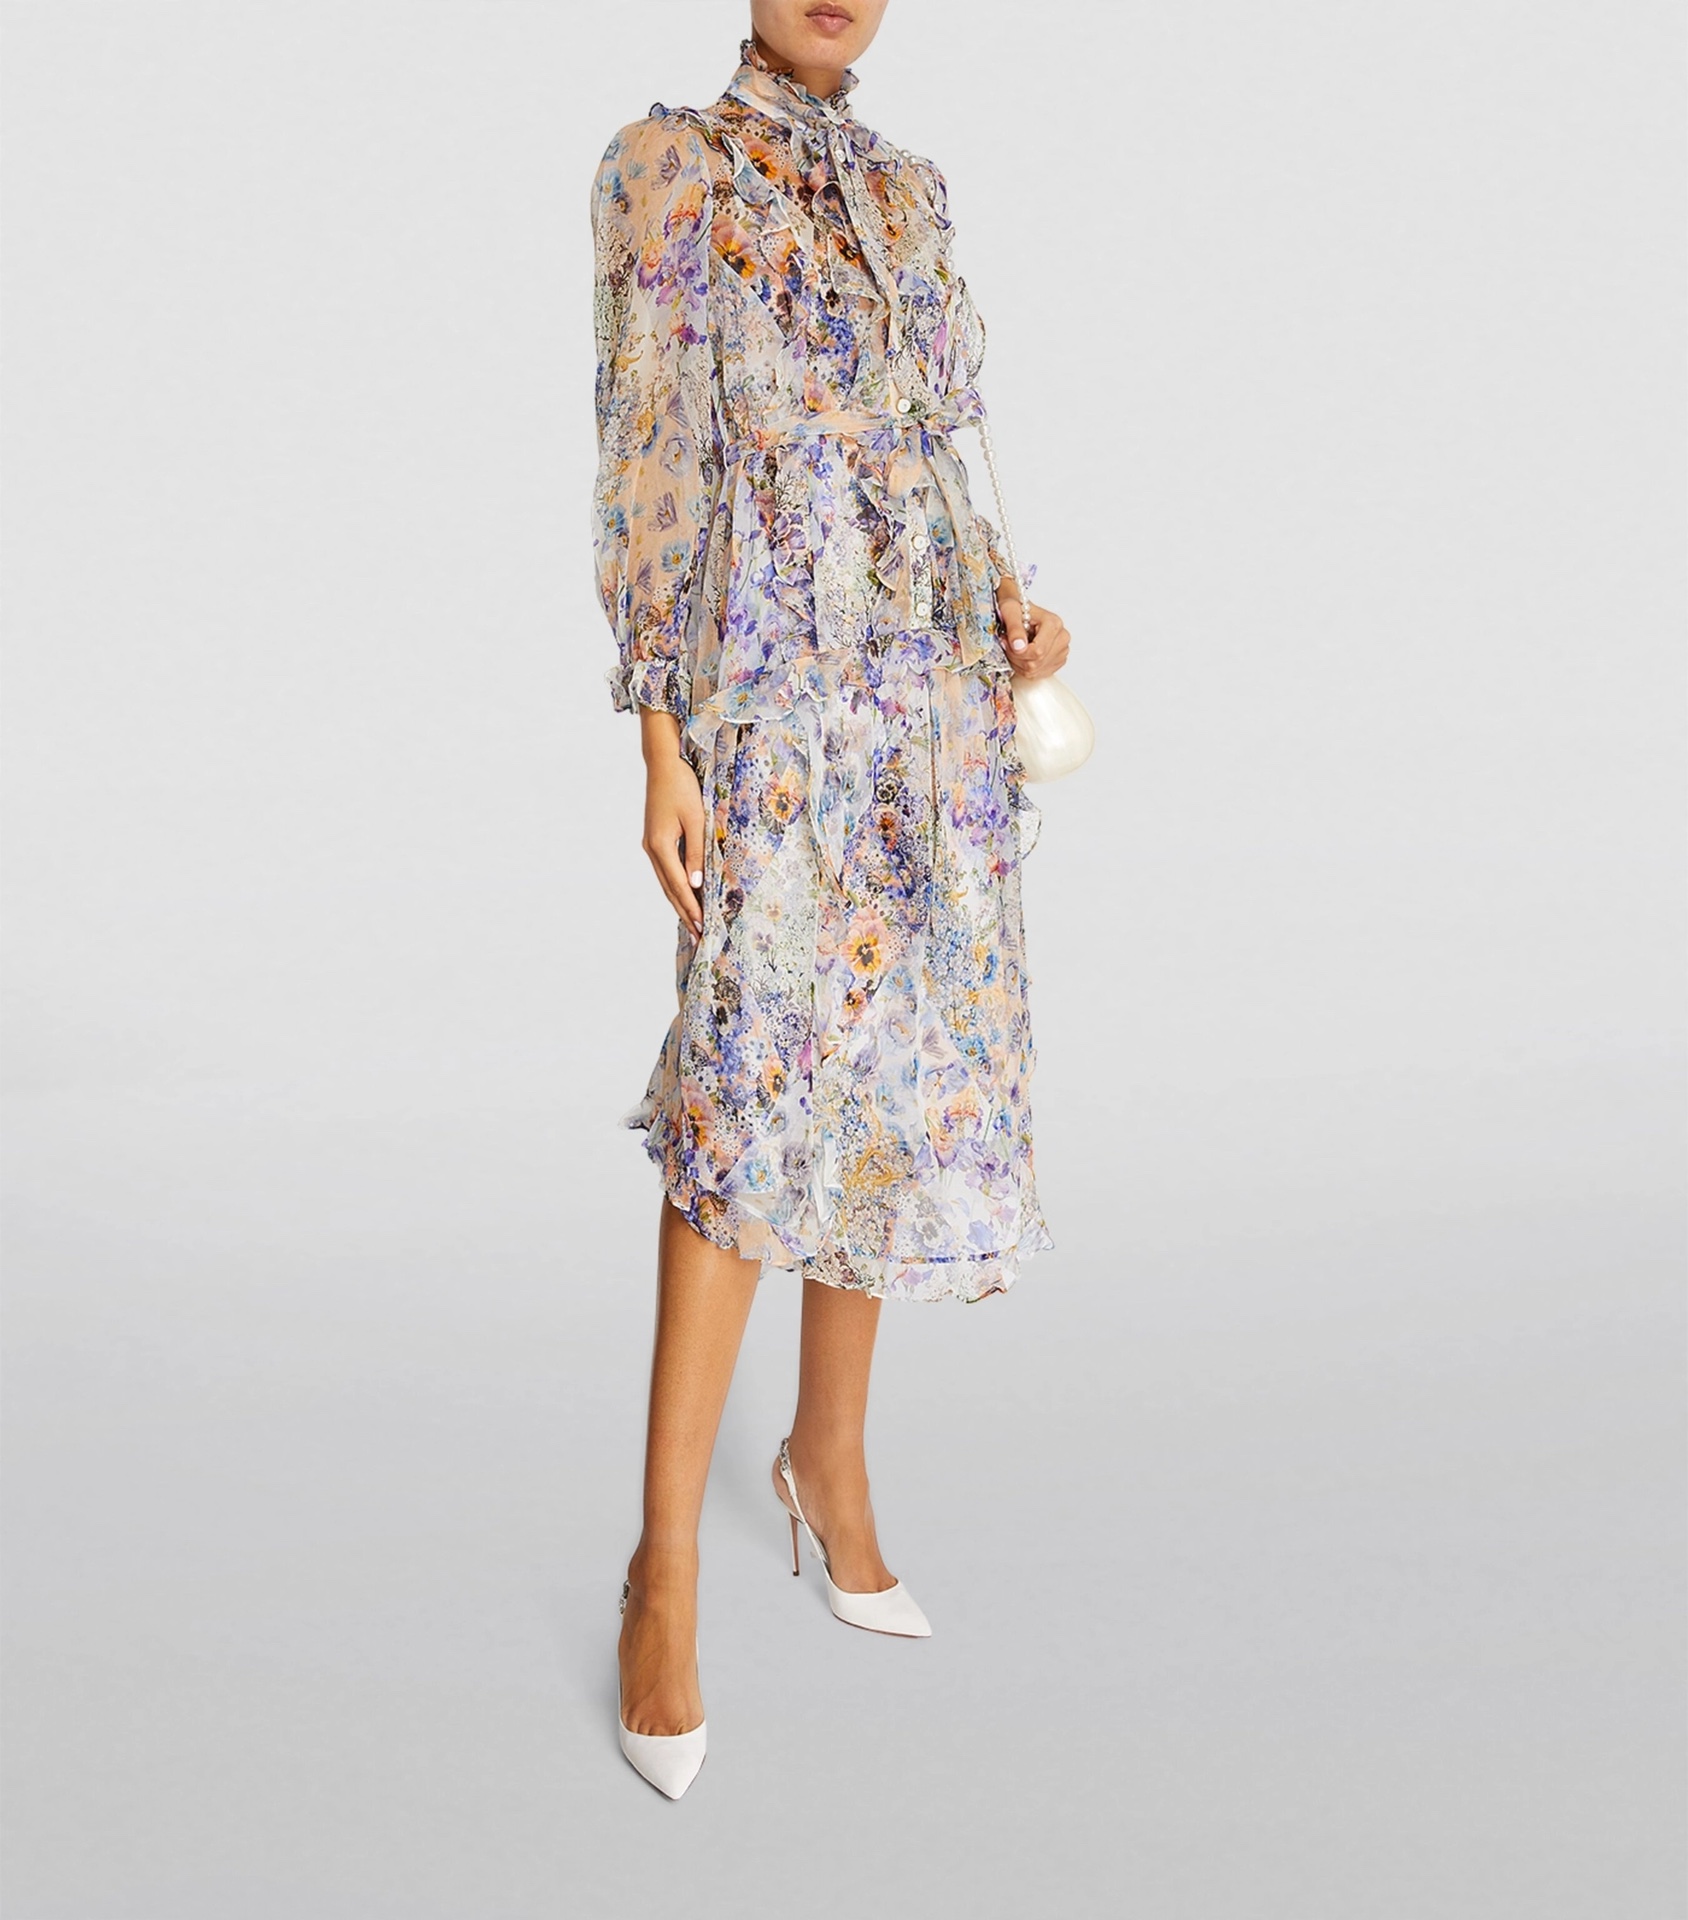 Zimmermann Clothing Dresses Buy High-Quality Fake
 Printing Silk Spring/Summer Collection